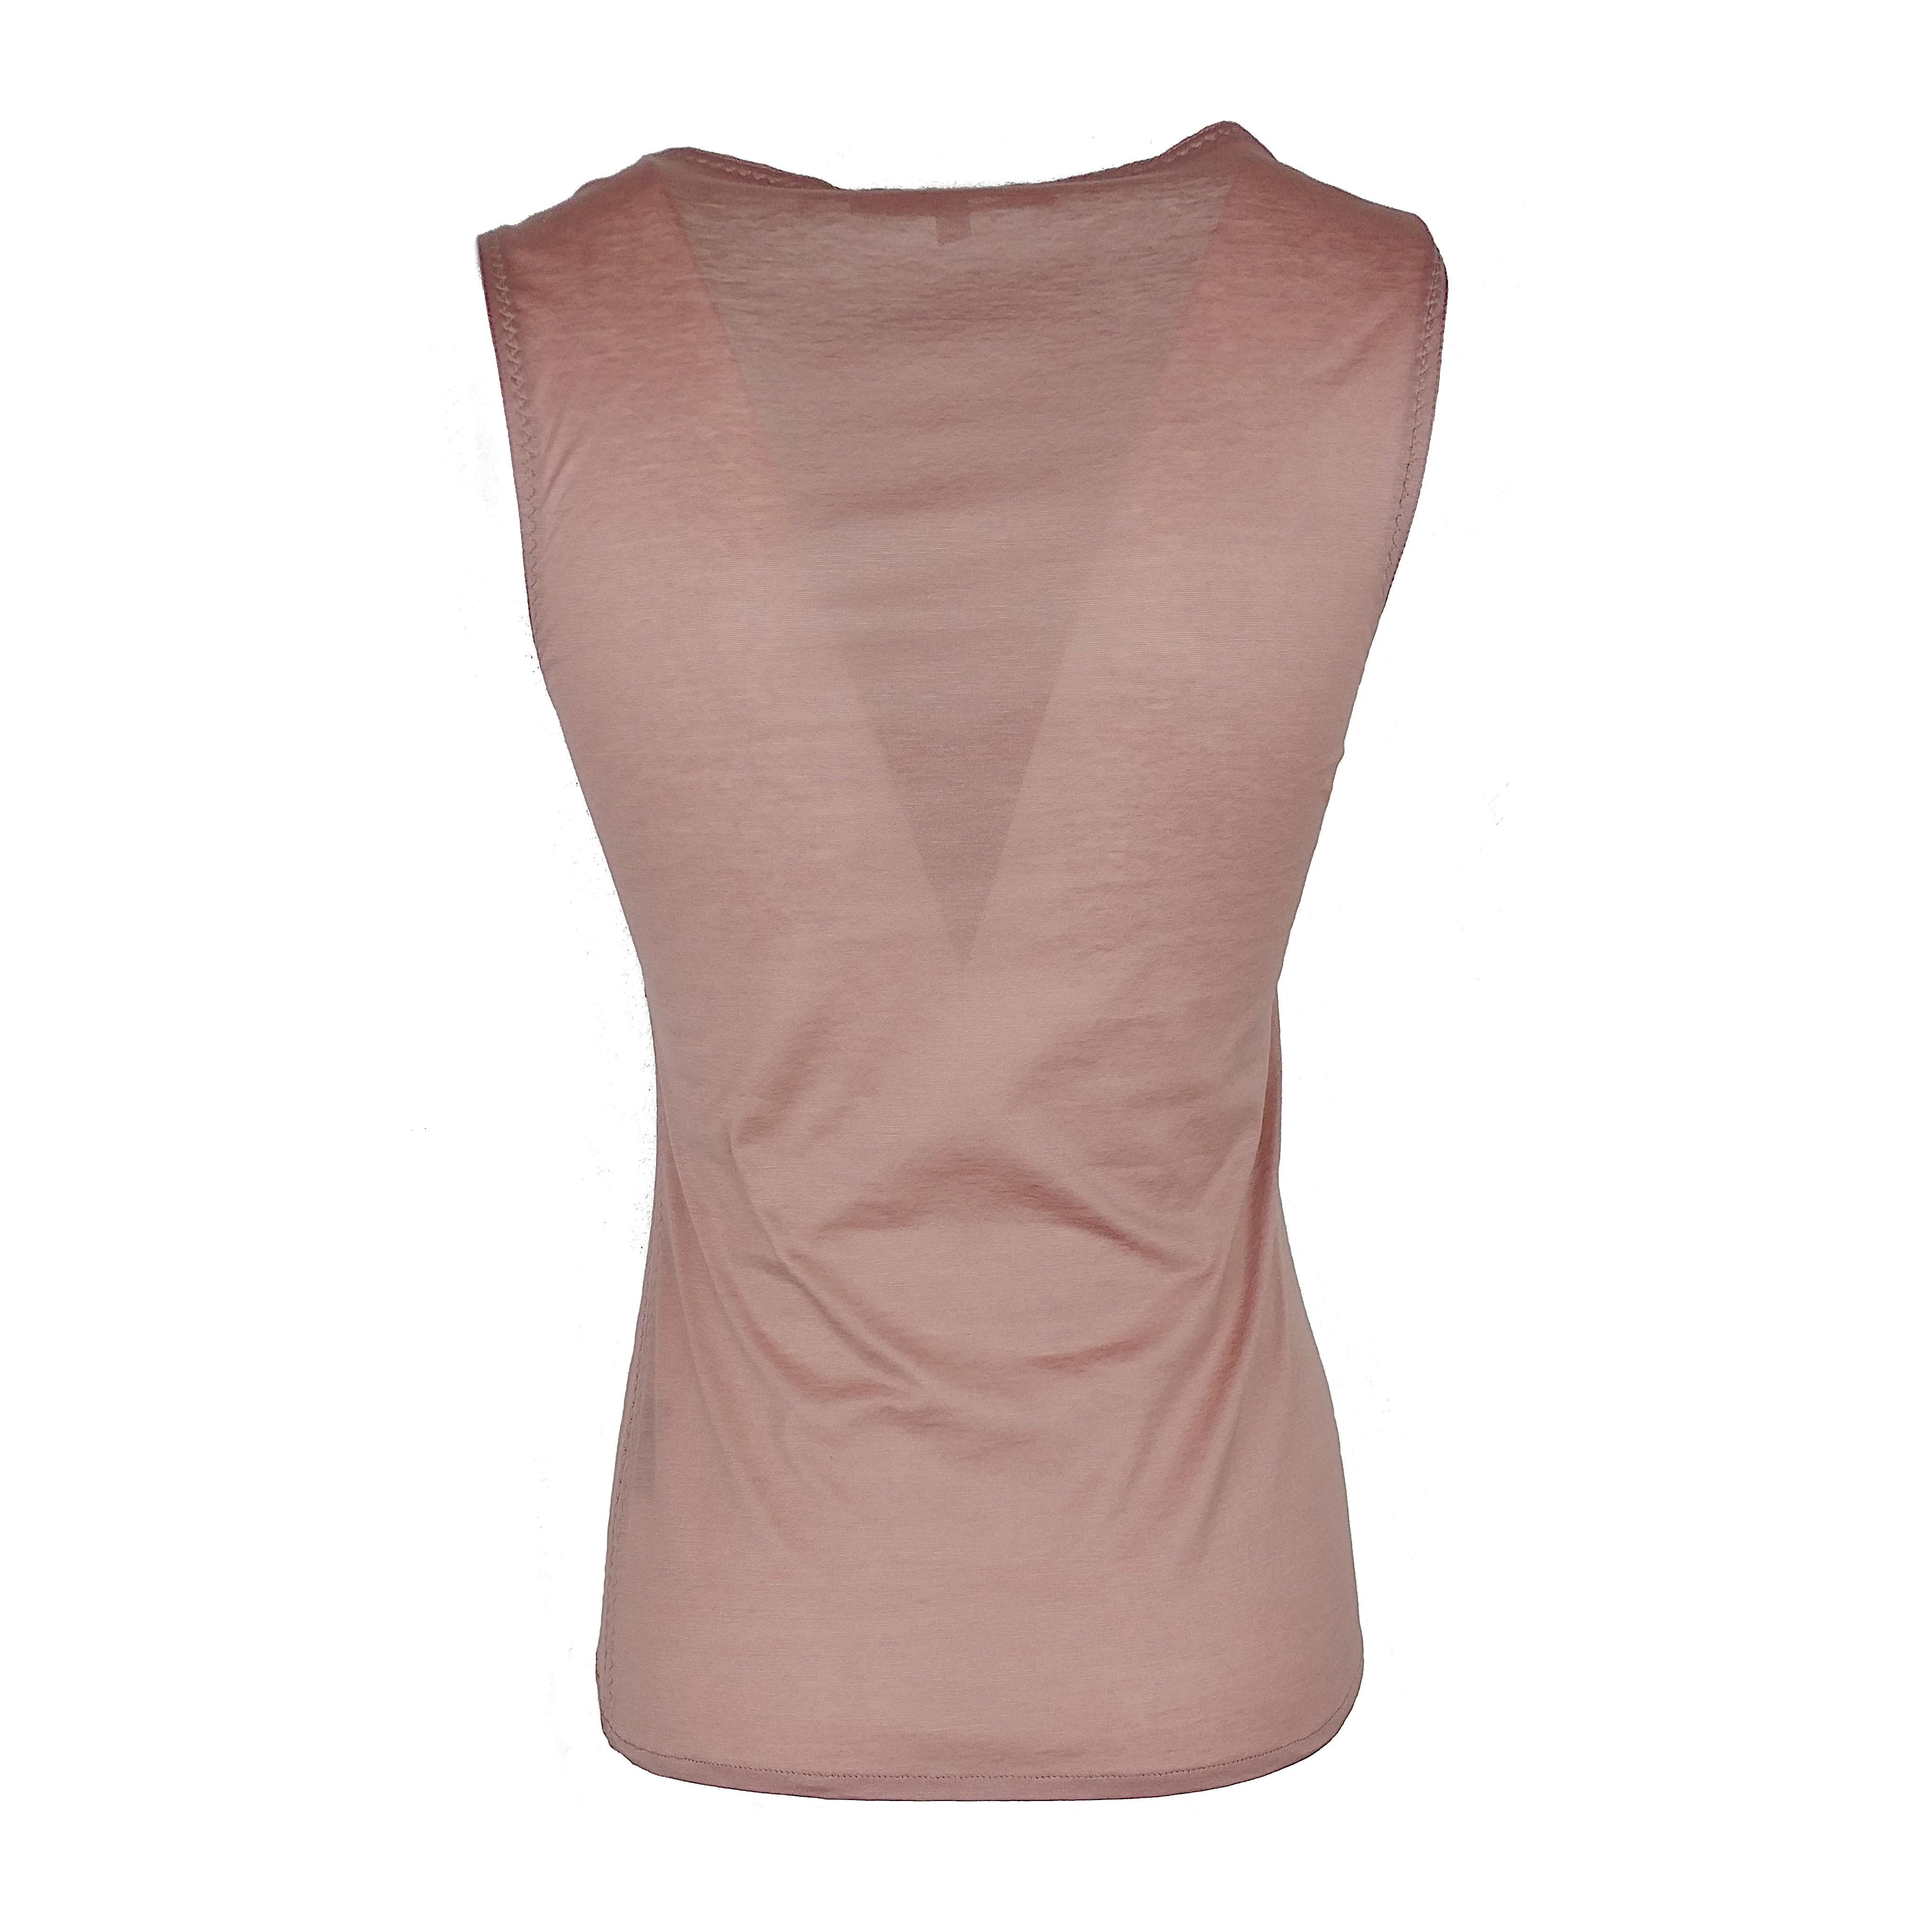 Brown GUCCI – Rose Cotton Tank Top Blouse with Saddle-Shaped Straps  Size M